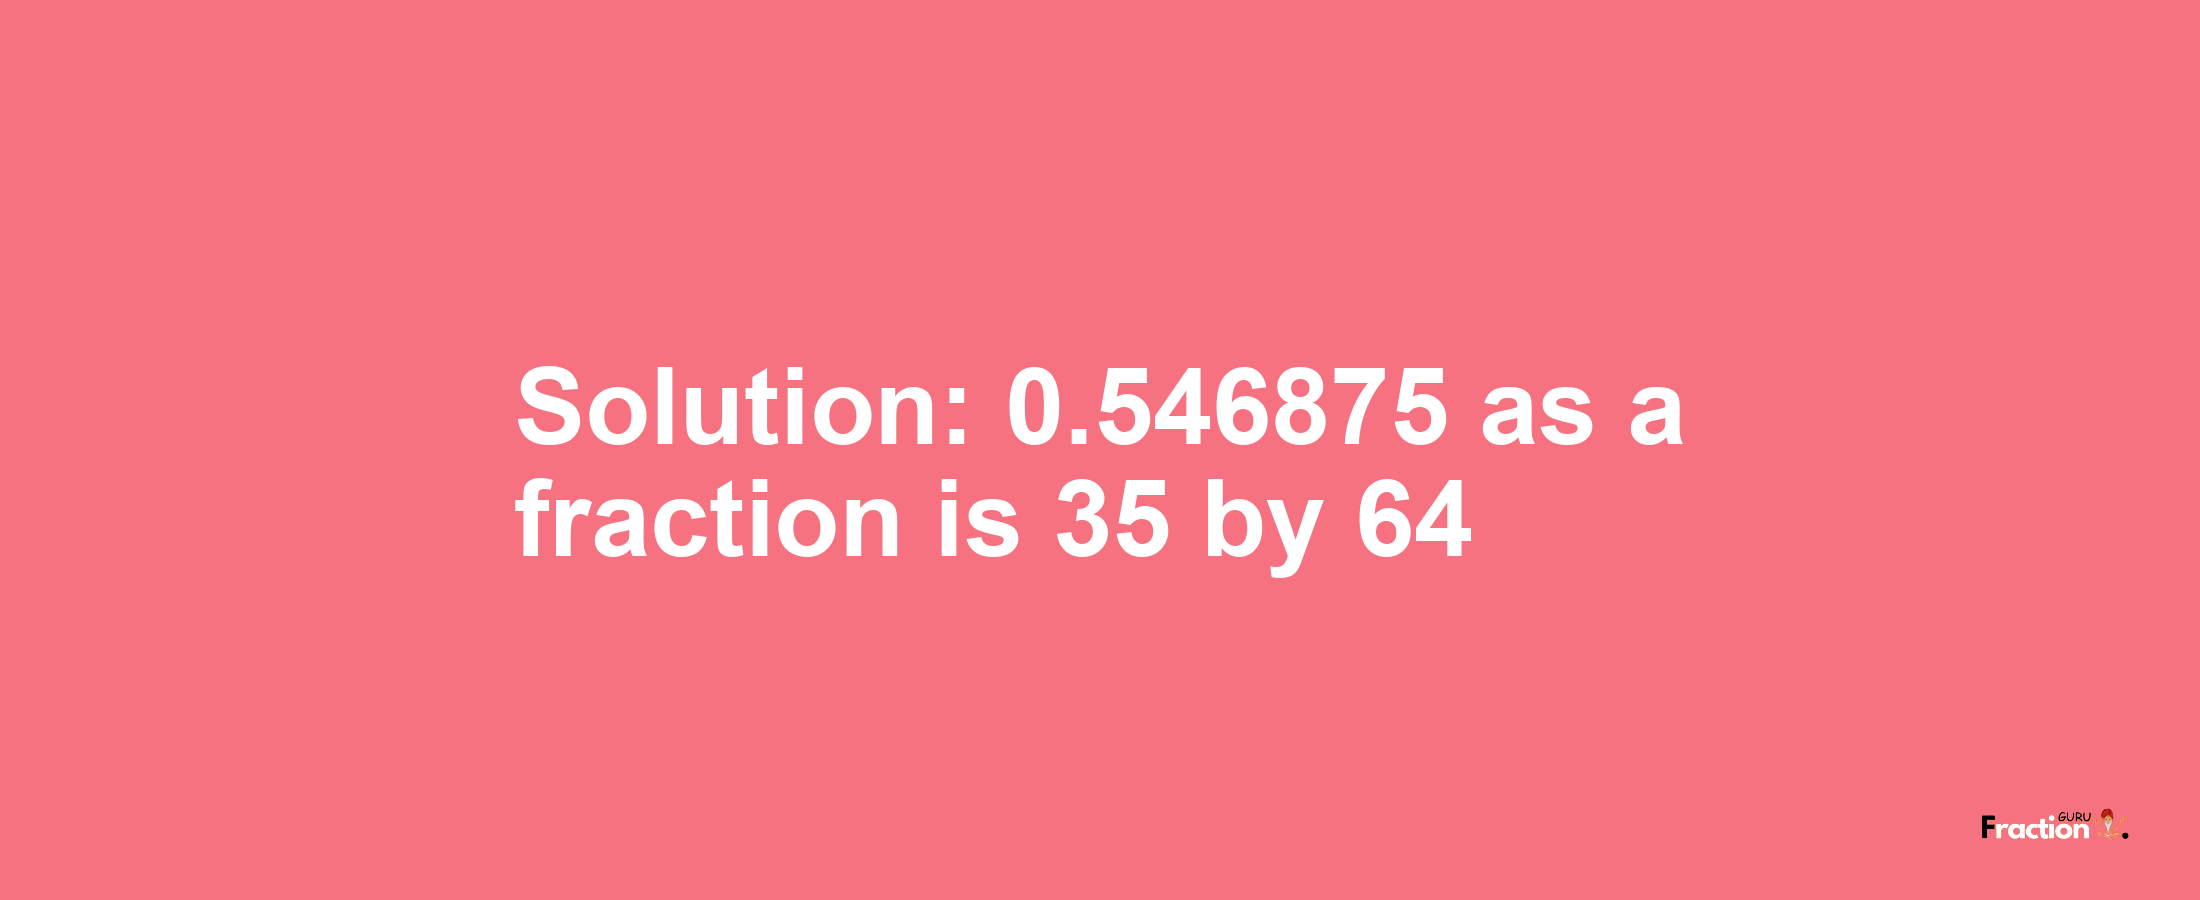 Solution:0.546875 as a fraction is 35/64